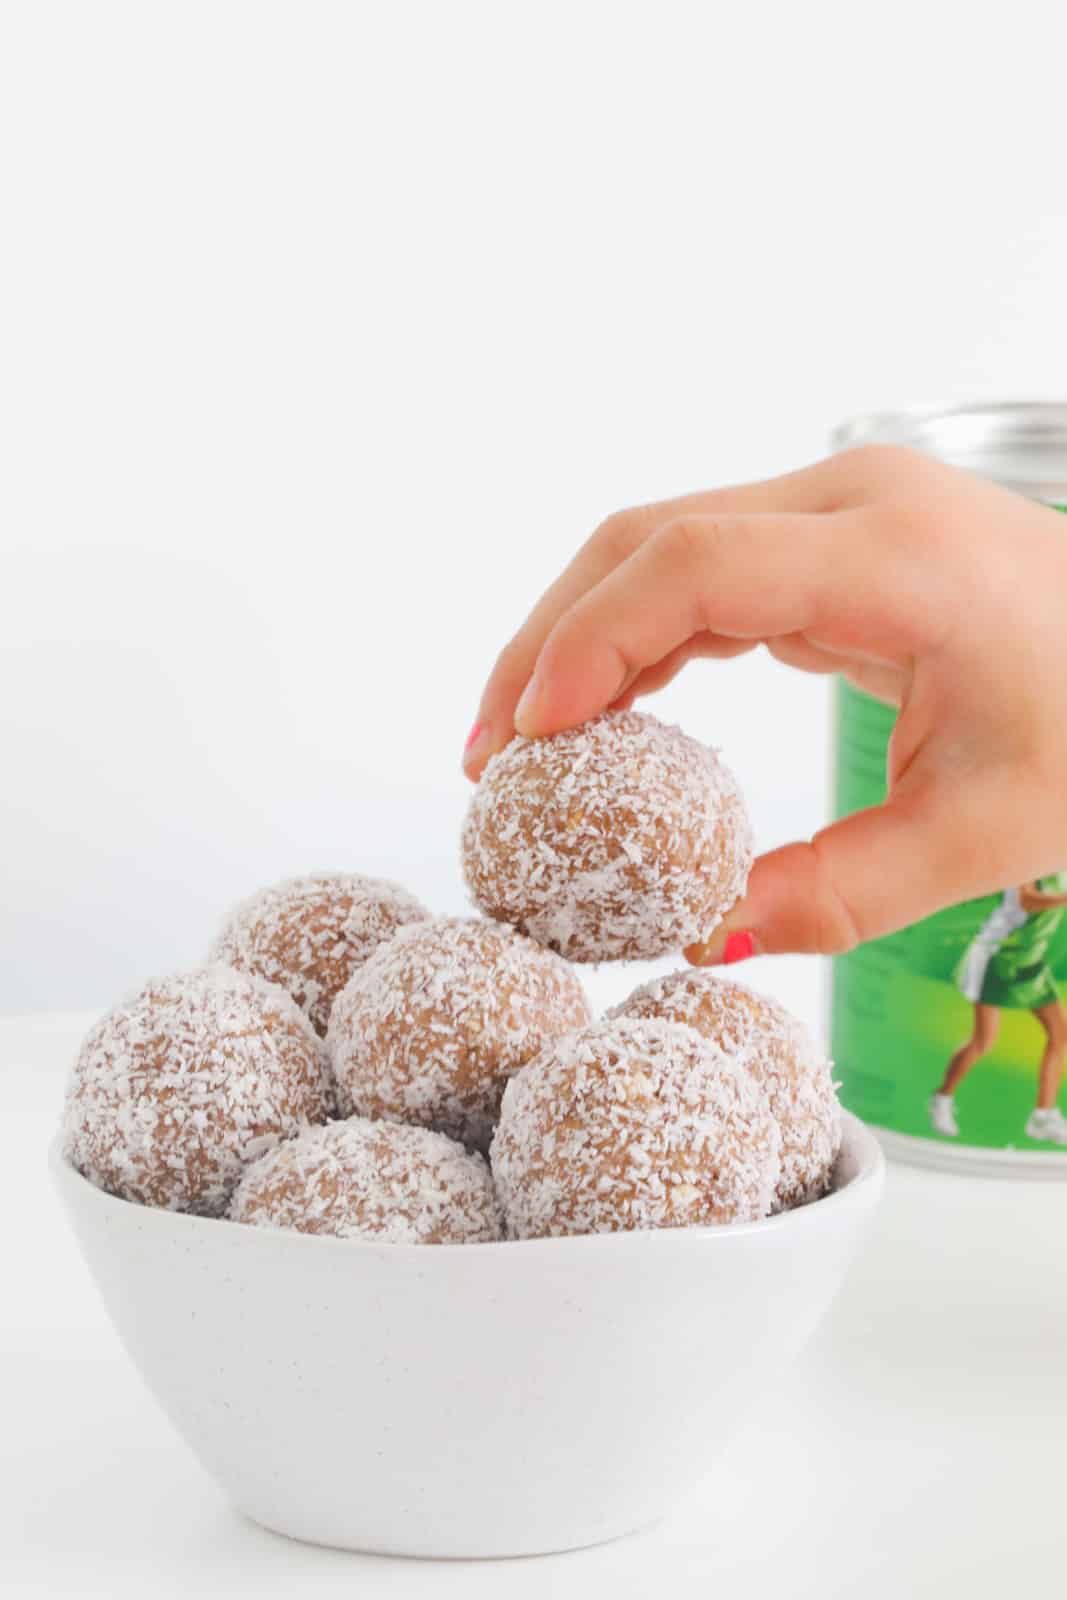 A hand reaching for a chocolate ball coated in coconut.